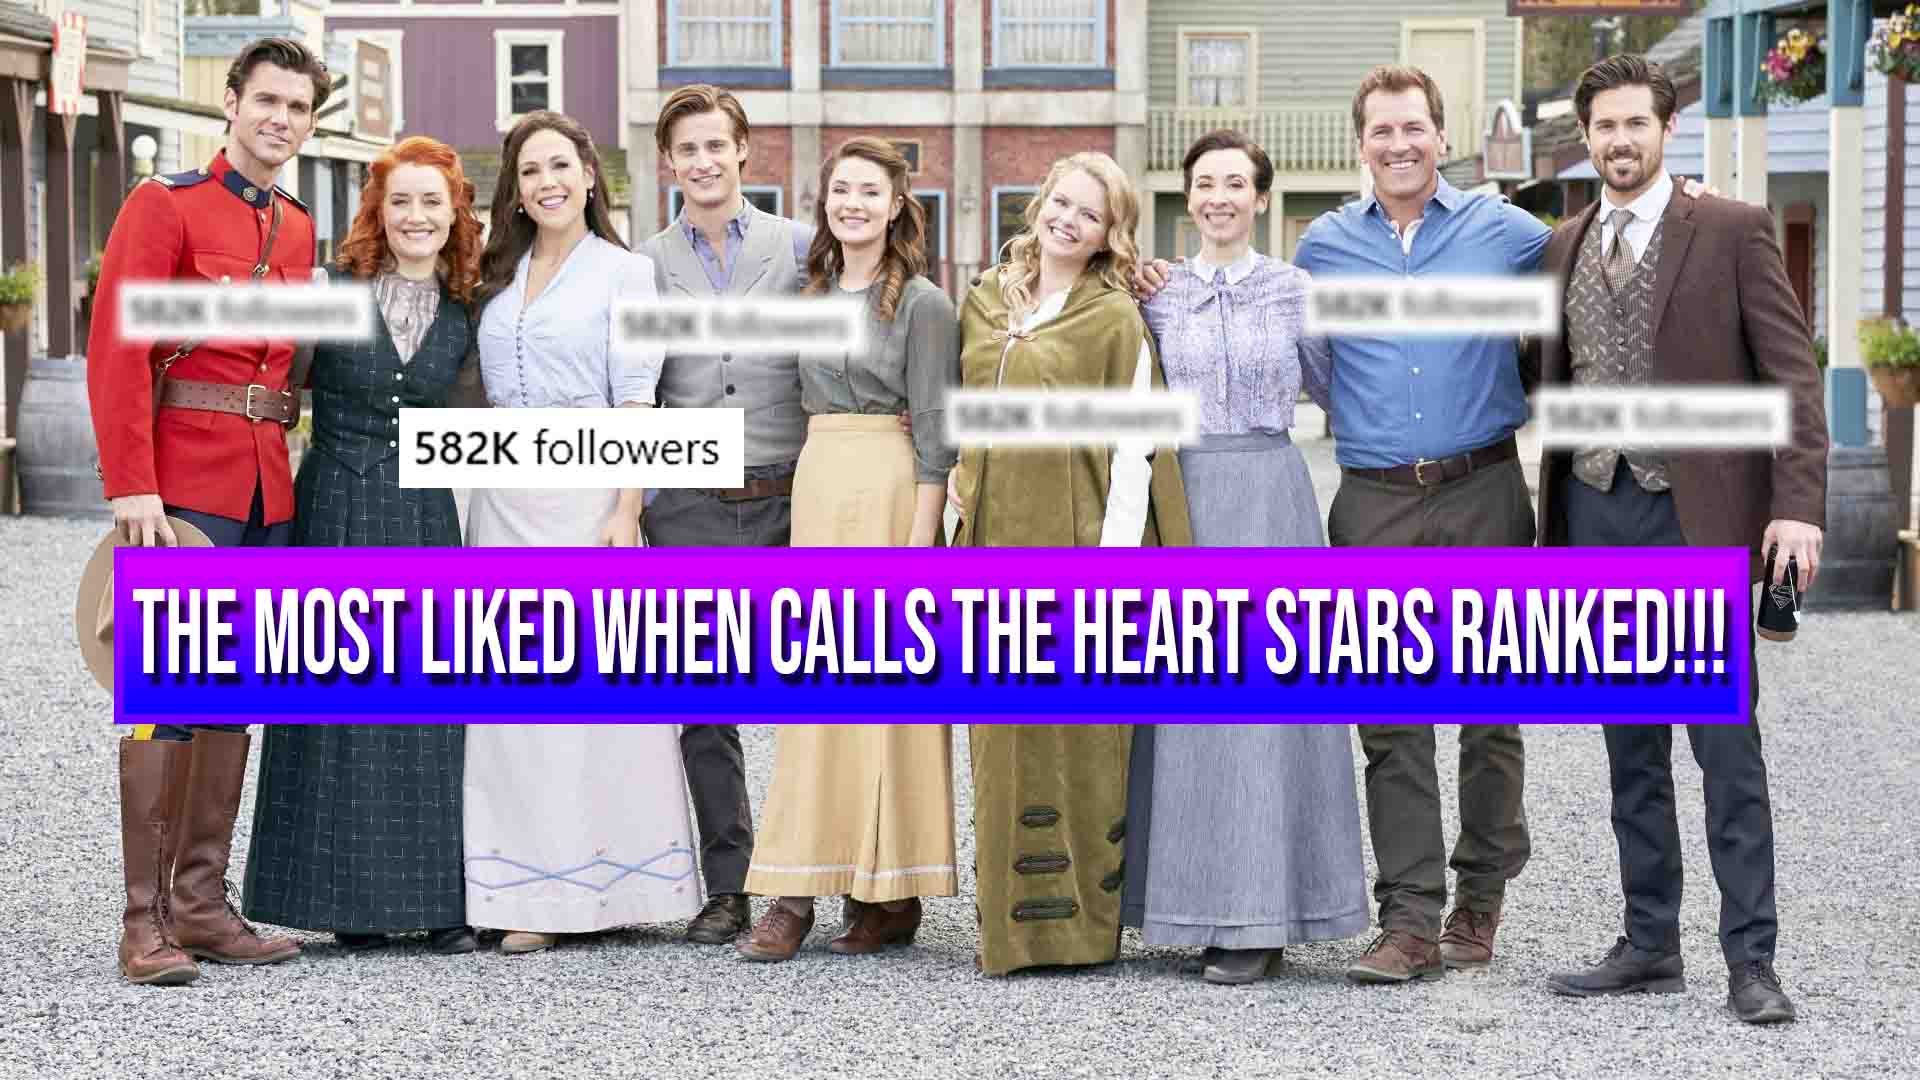 The Most Liked When Calls the Heart Stars Ranked From Lowest